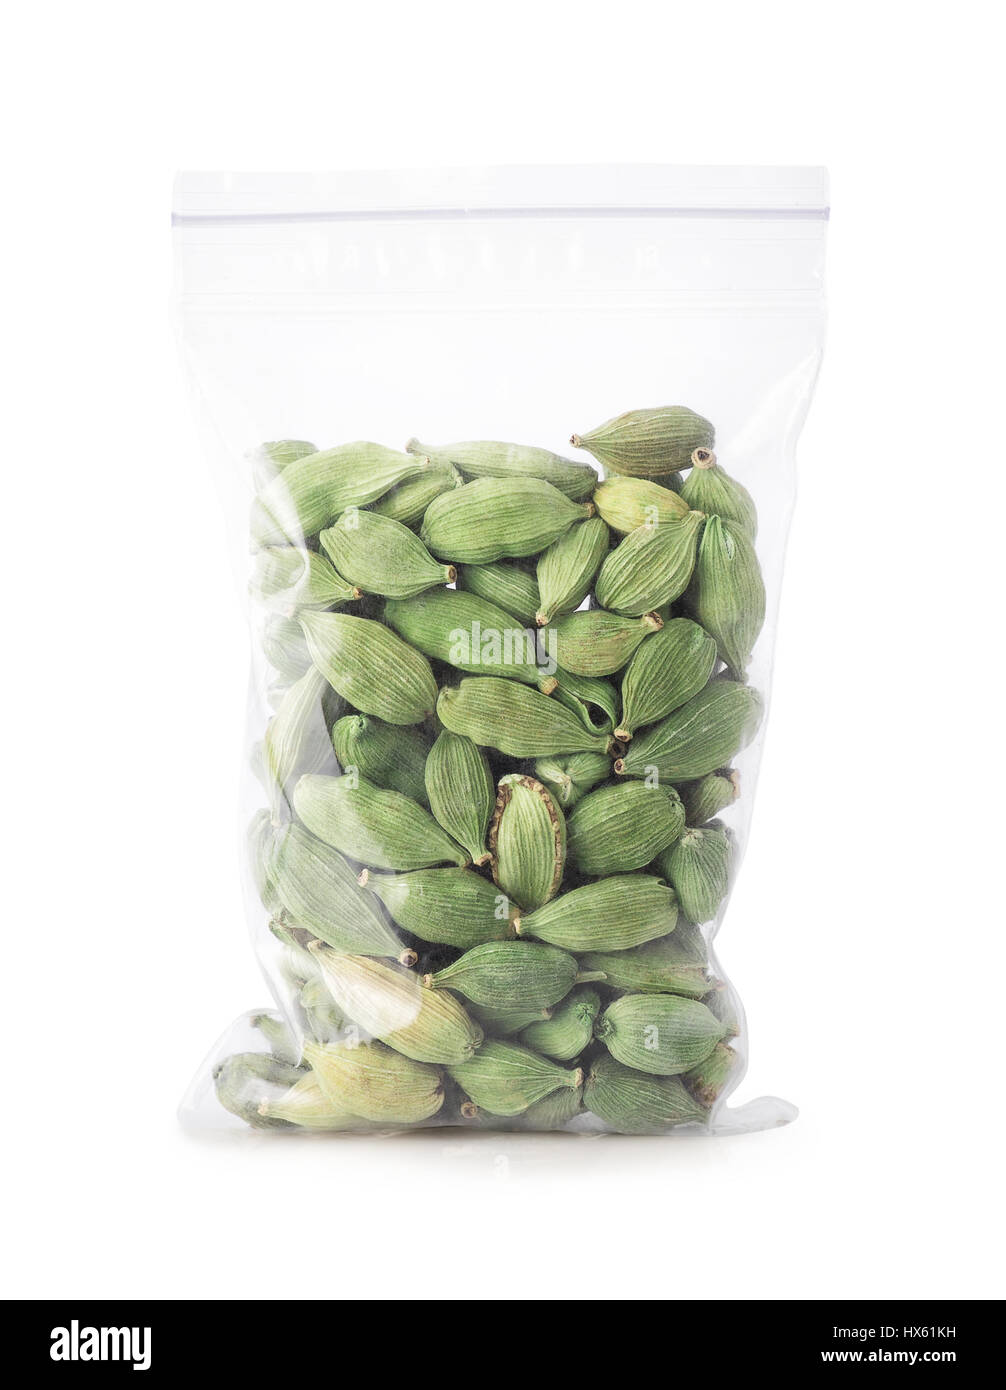 green cardamom seeds in plastic zipper bag isolated on white background. Cardamom pods in bag. Indian spice. Condiment Stock Photo